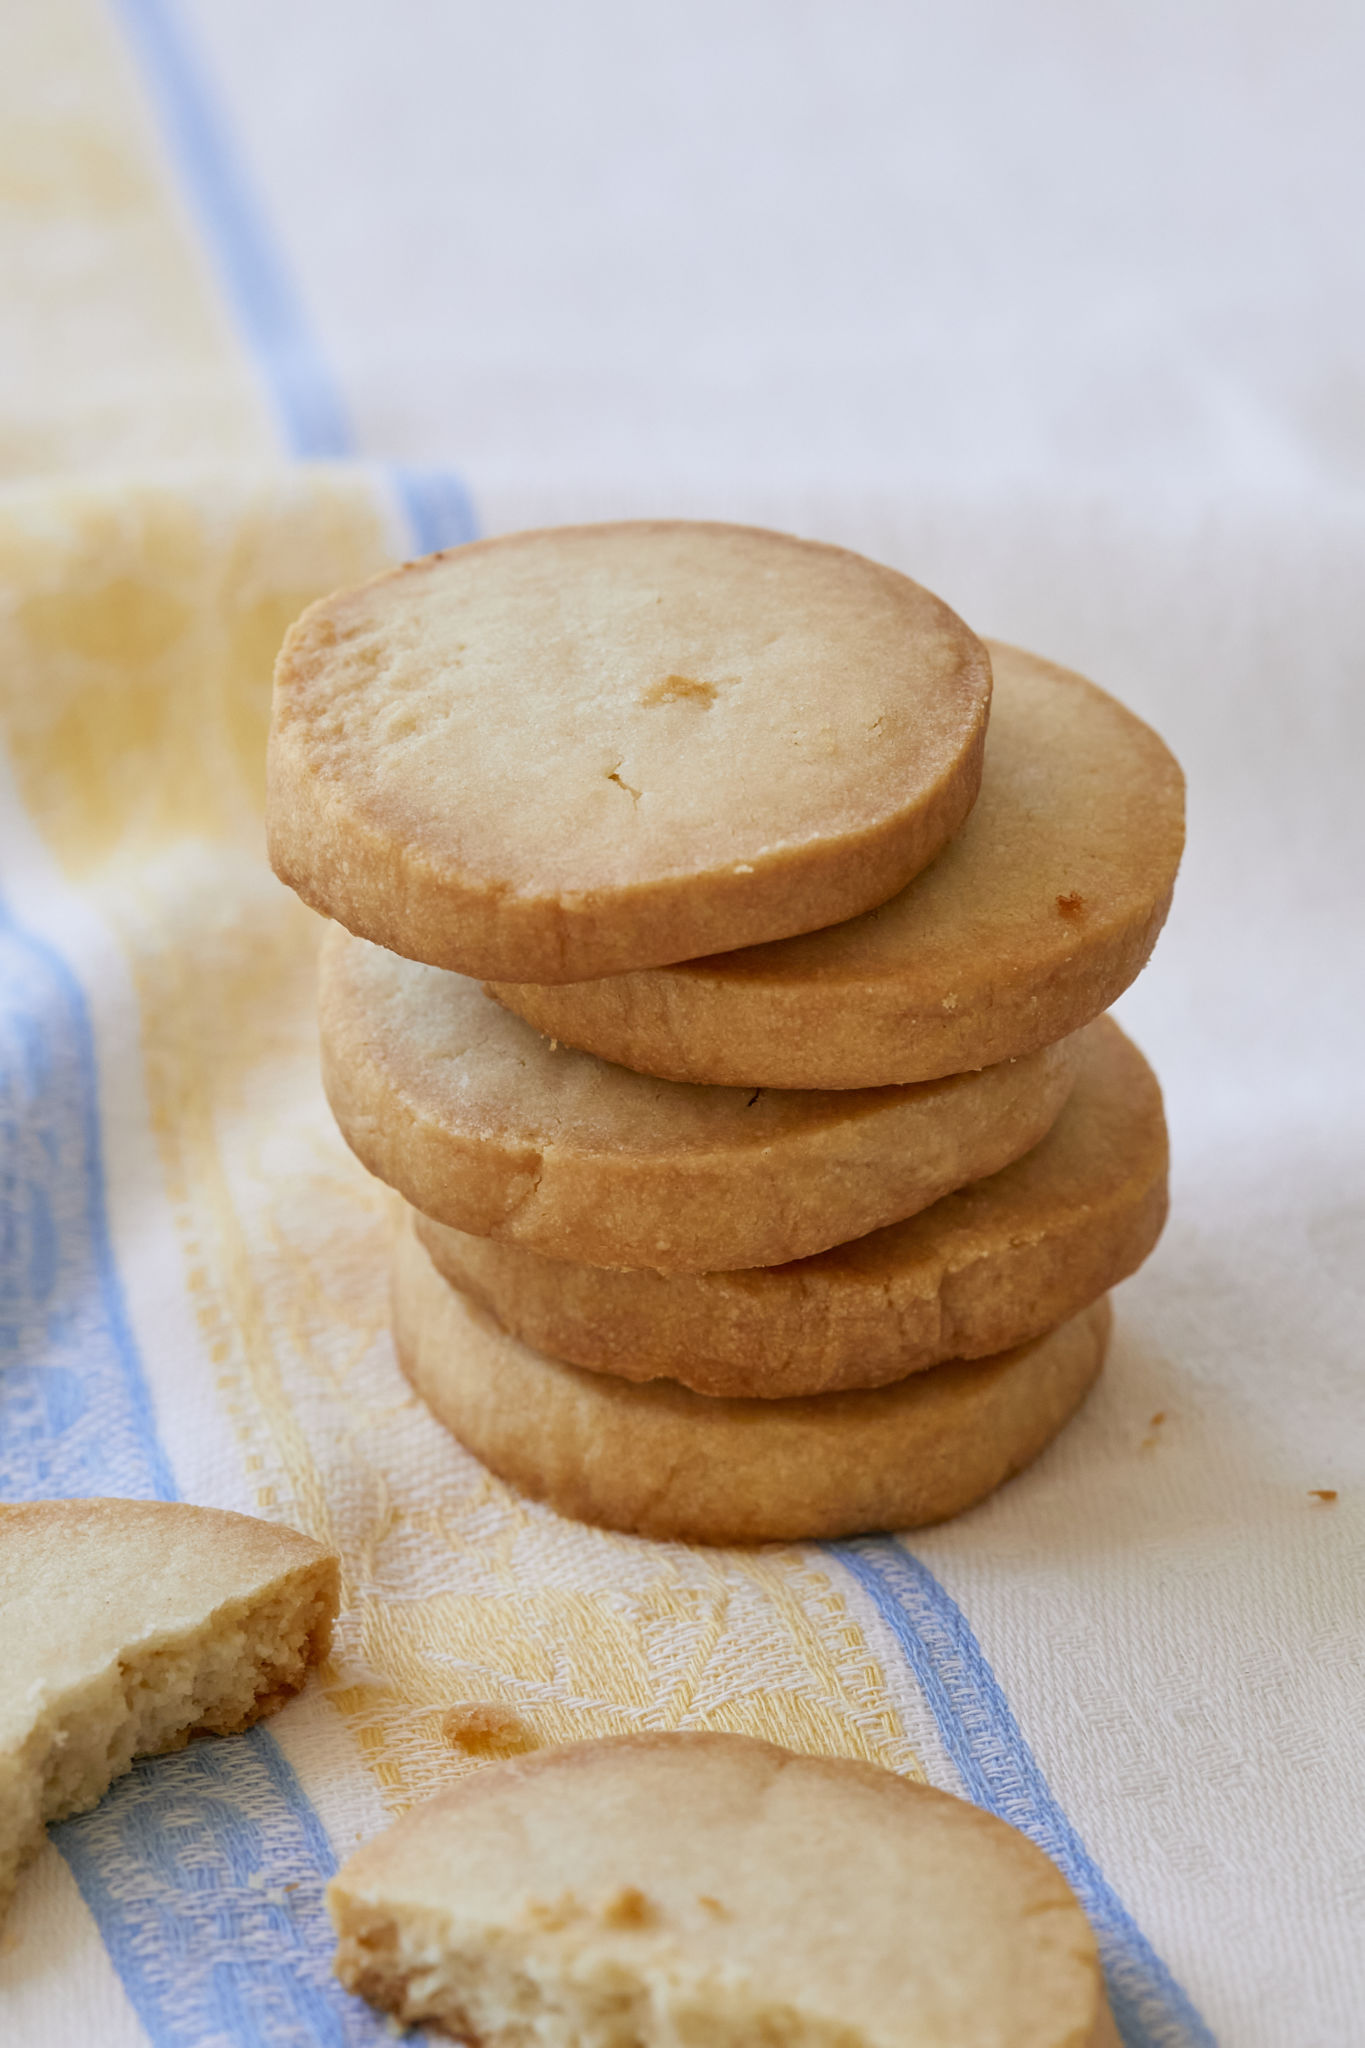 Shortbread cookies are stacked on top of each other. One shortbread cookie is broken in half and looks crispy.